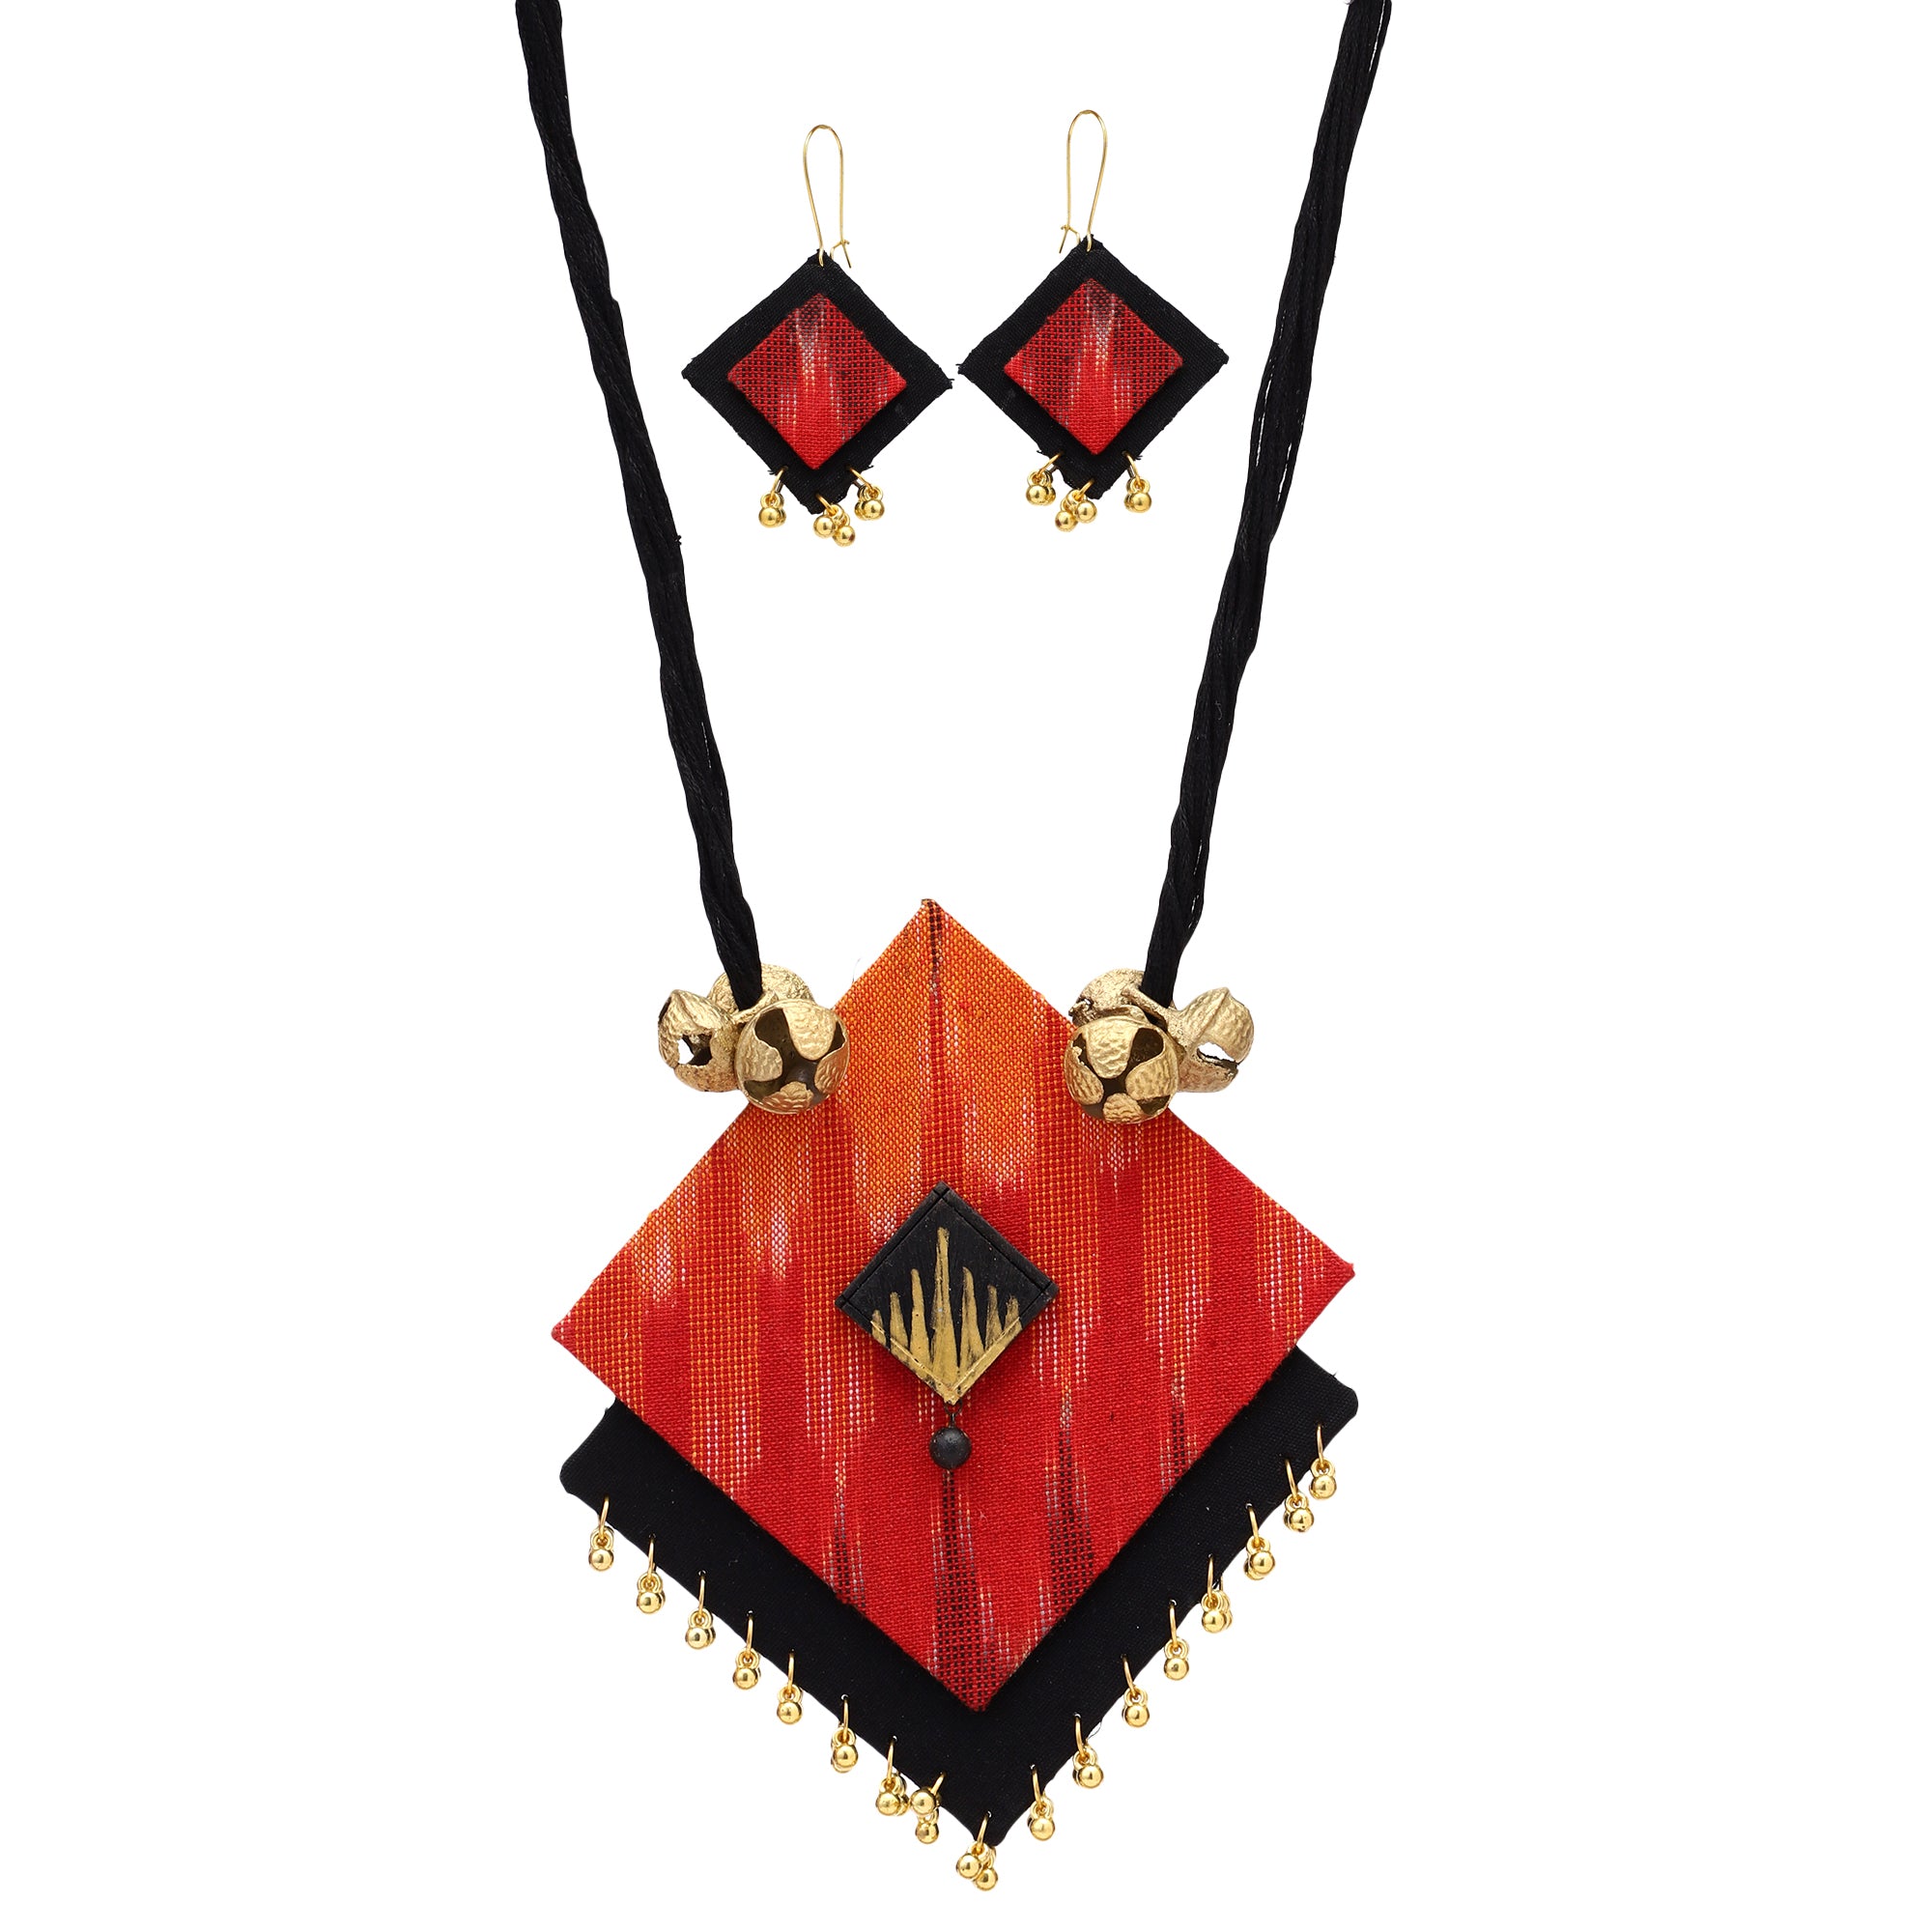 Fabric and metal designed necklace set